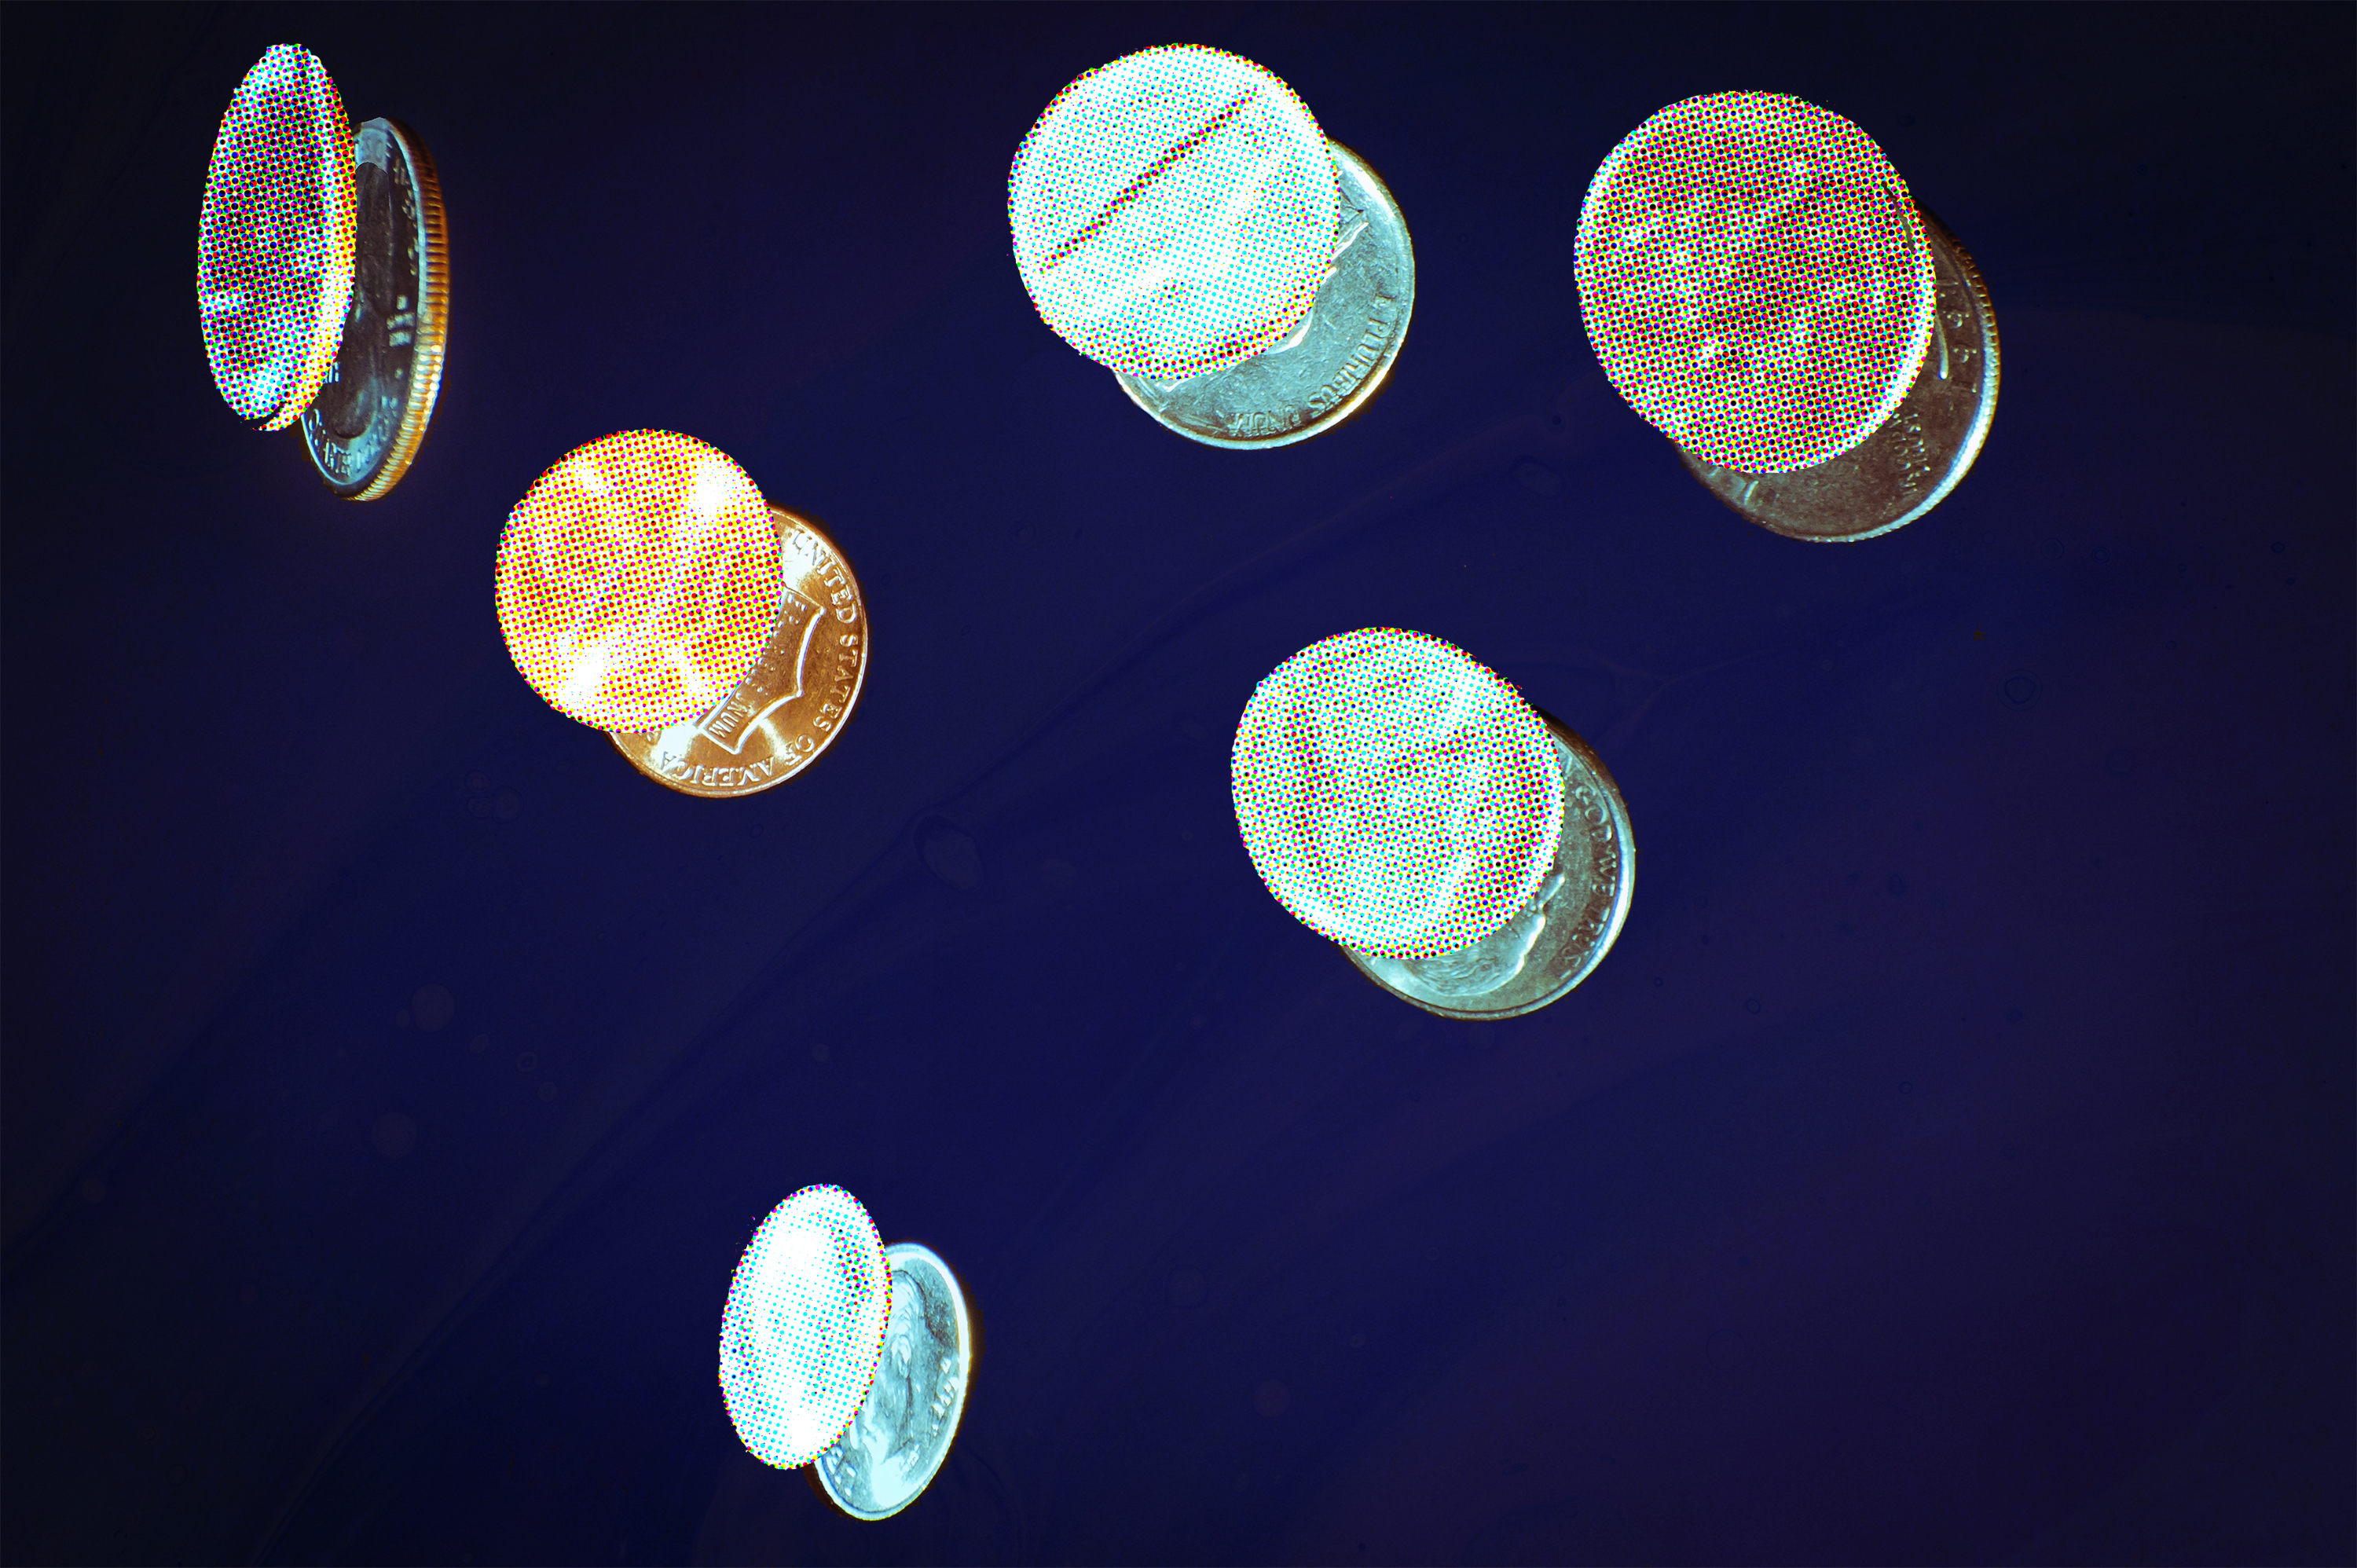 Illustration of coins in front of a dark blue background.